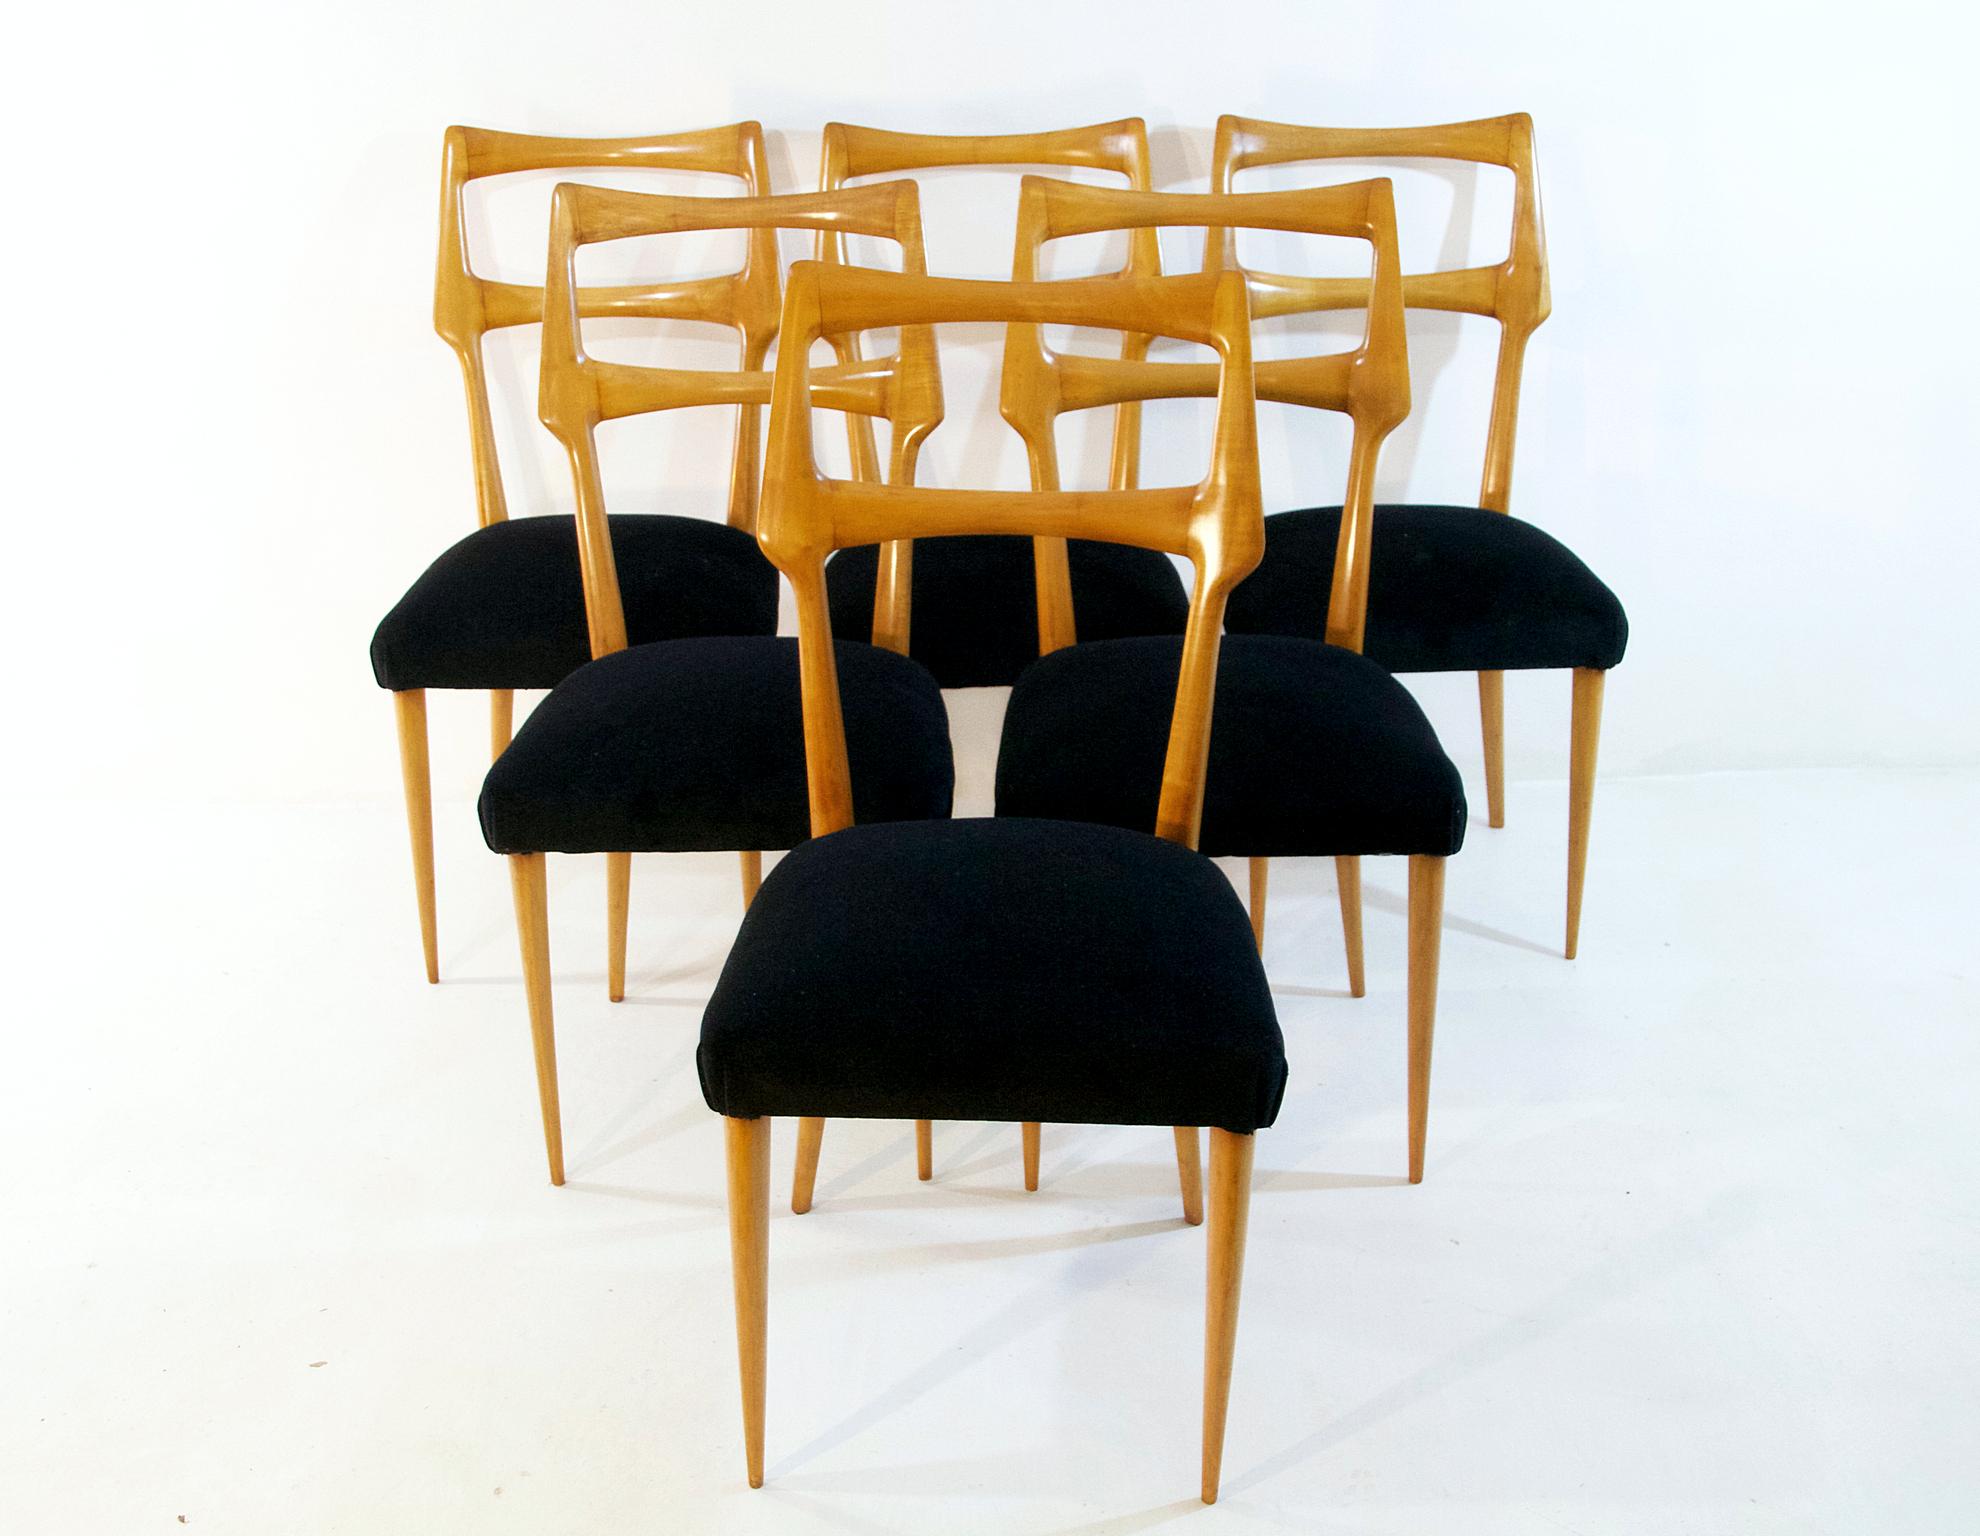 A set of six Italian dining chairs with a sublime organic design in maple attributed to Augusto Romano and re-upholstered in black velvet. The chairs have supreme craftsmanship and are in great condition. Very comfortable for long dinner